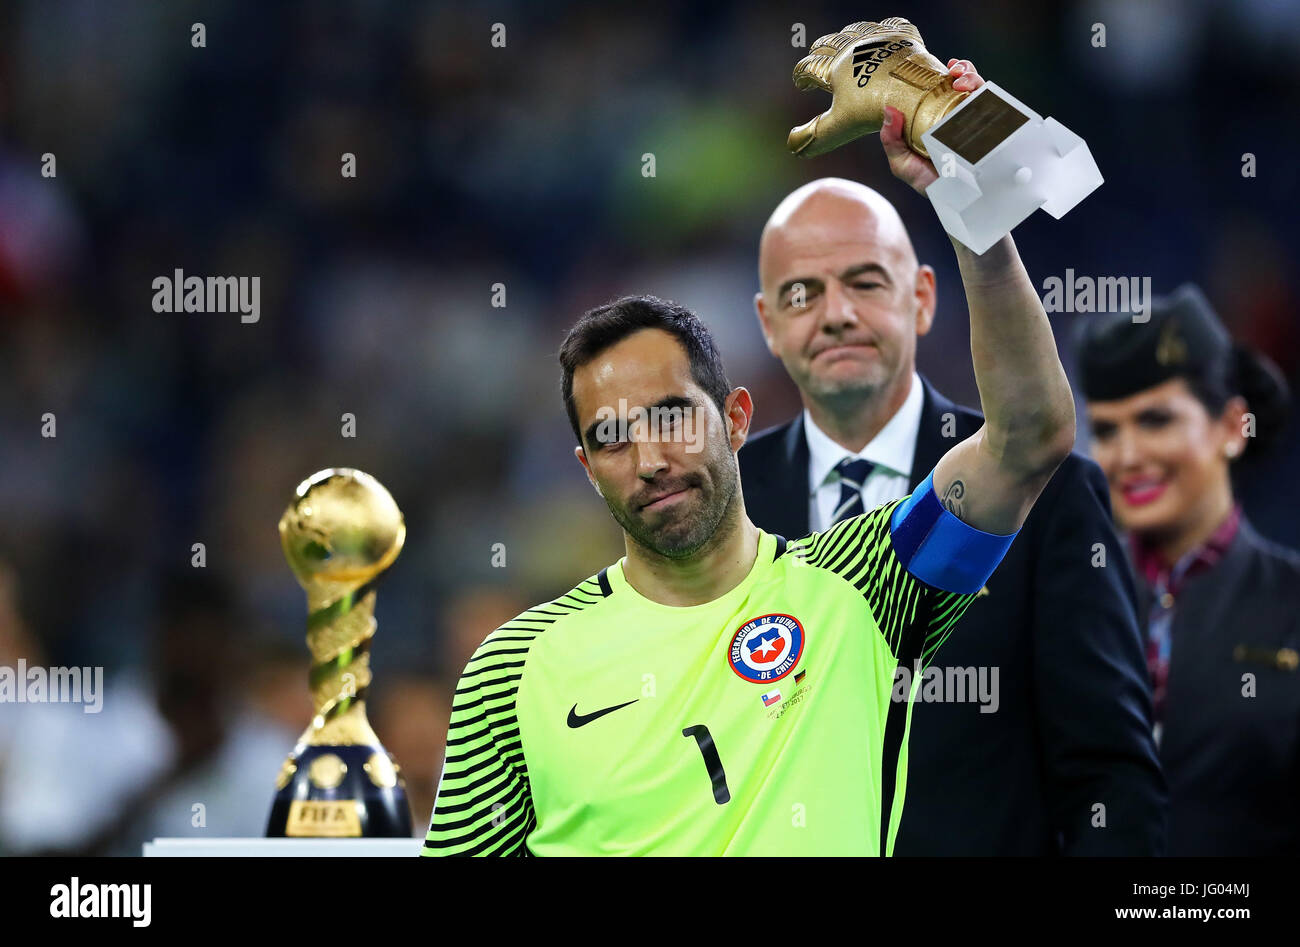 St. Petersburg, Russia. 2nd July, 2017. Claudio Bravo of Chile receives the title of lesser goalkeeper after Chile-Germany match valid for the 2017 Confederations Cup Final this Sunday (02), held at the Krestovsky Stadium (Zenit Arena) in St. Petersburg, Russia. (Photo: Heuler Andrey/DiaEsportivo/Fotoarena) Stock Photo